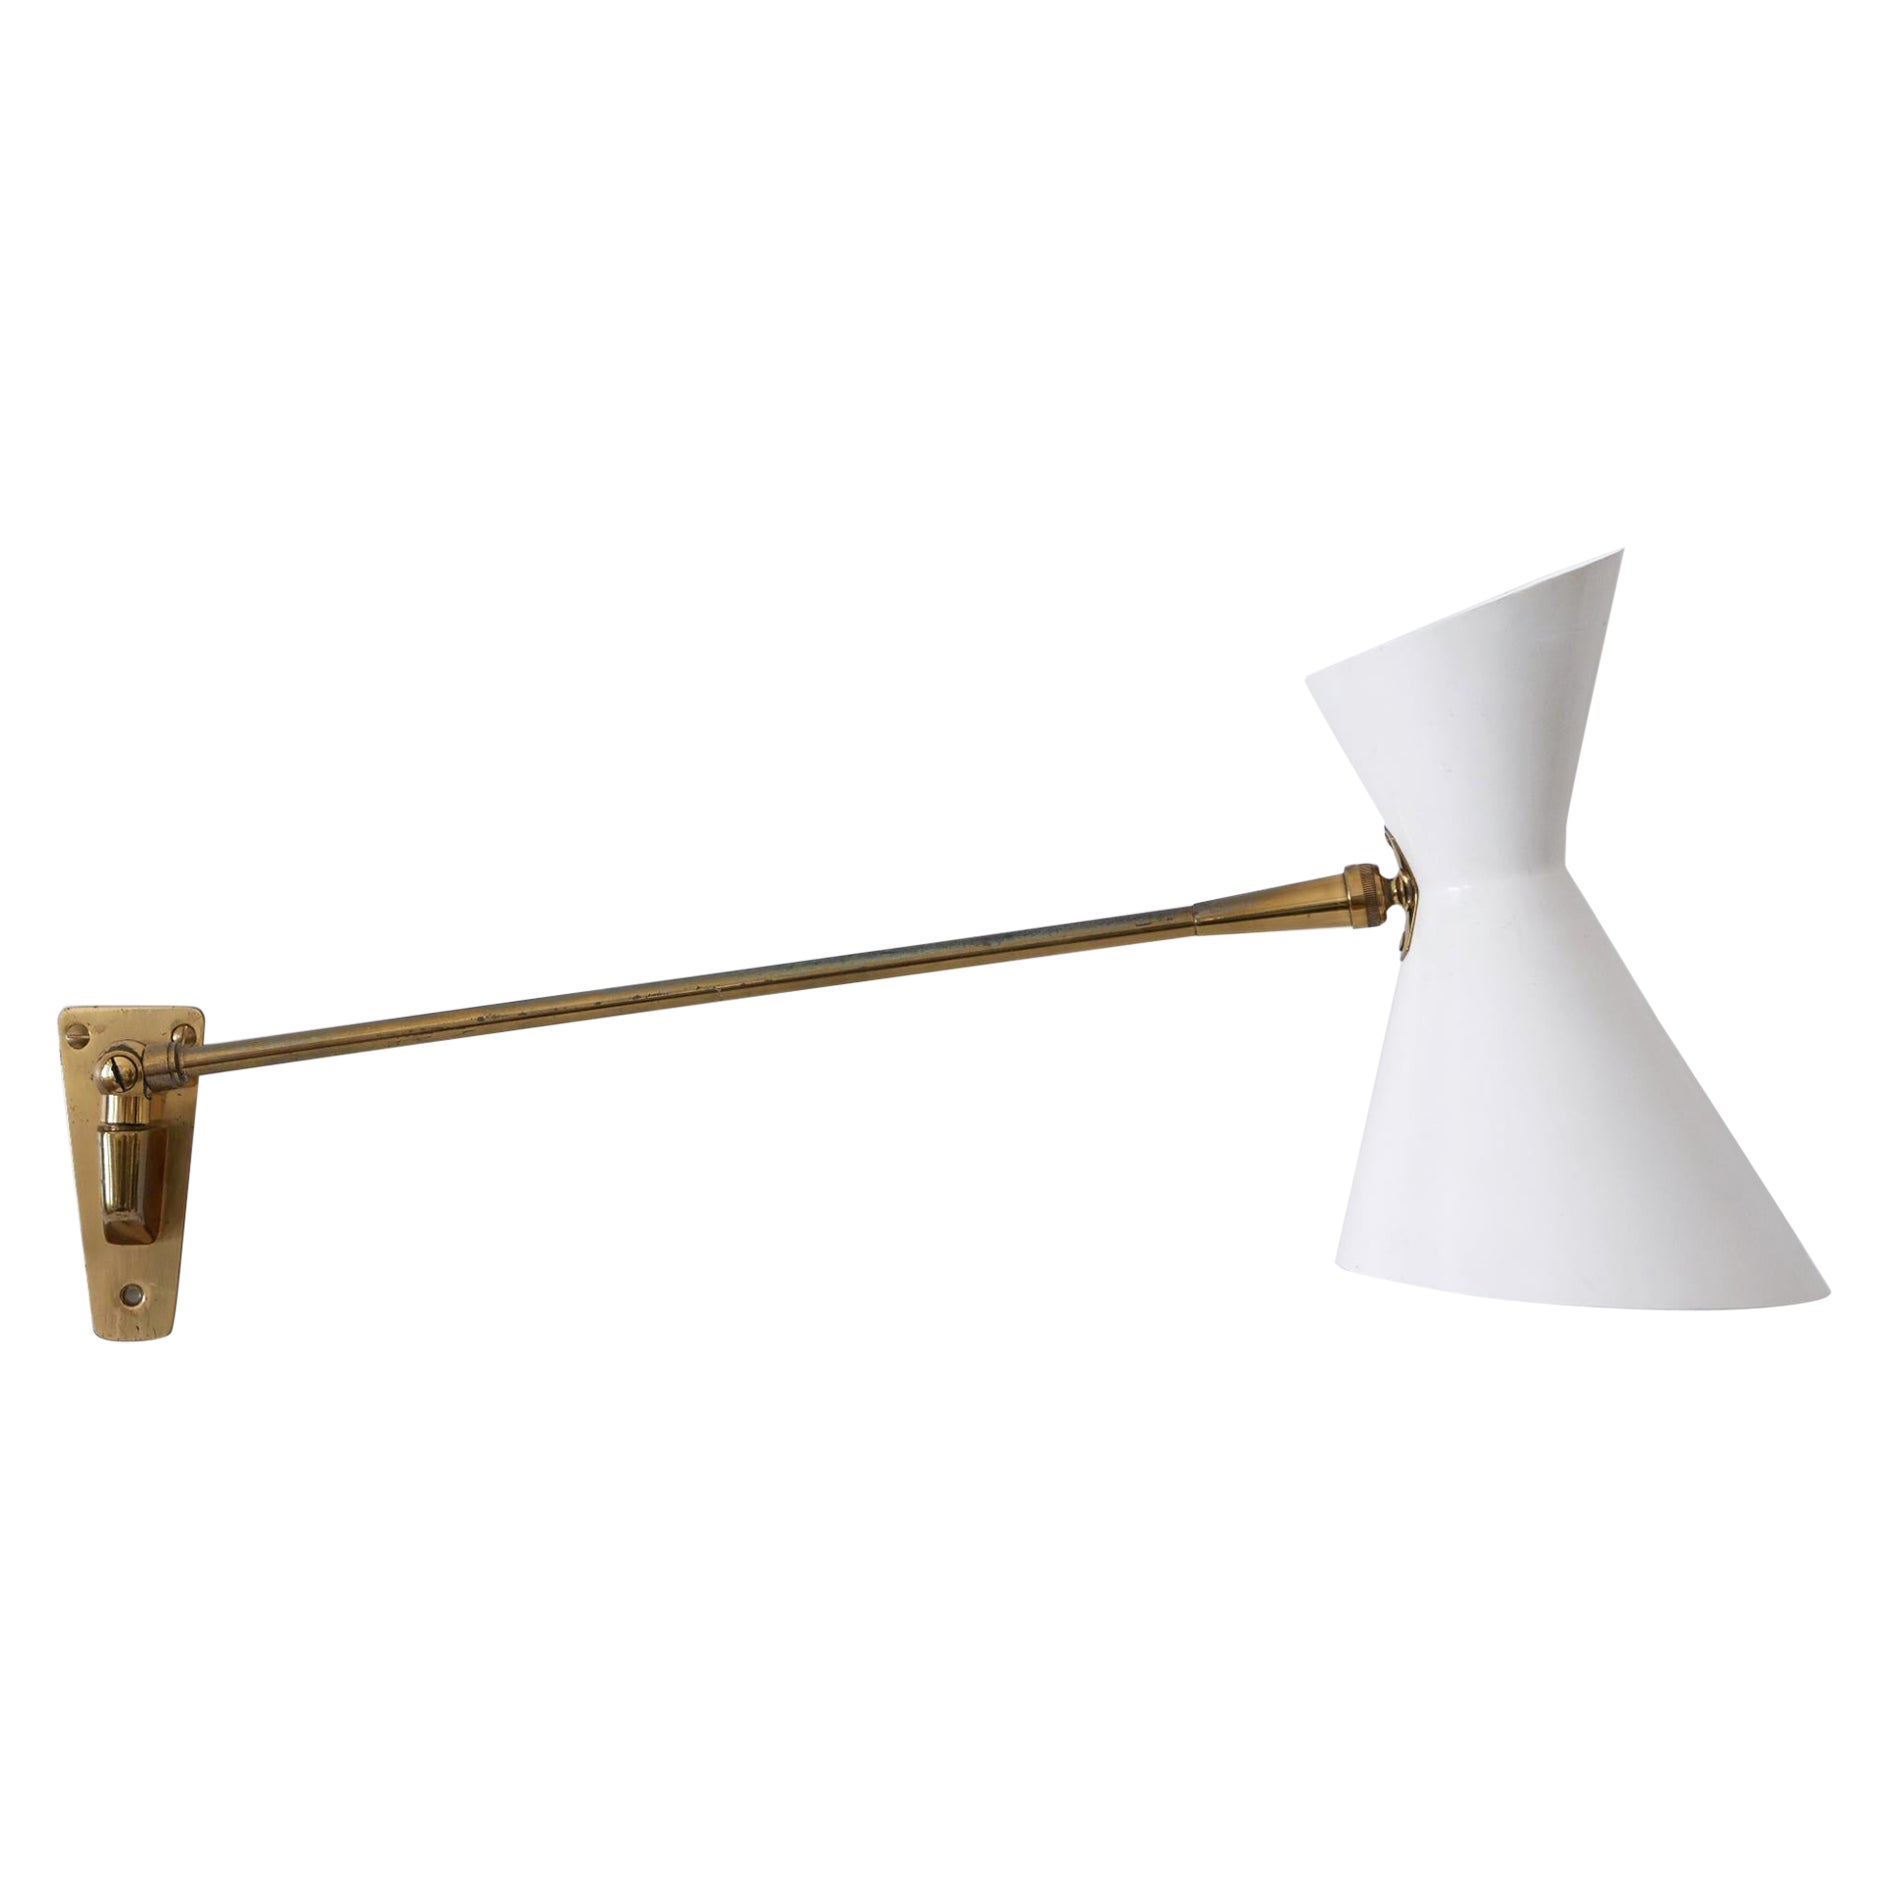 Elegance Mid Century Articulated Diabolo Wall Lamp by Belmag Switzerland 1950s